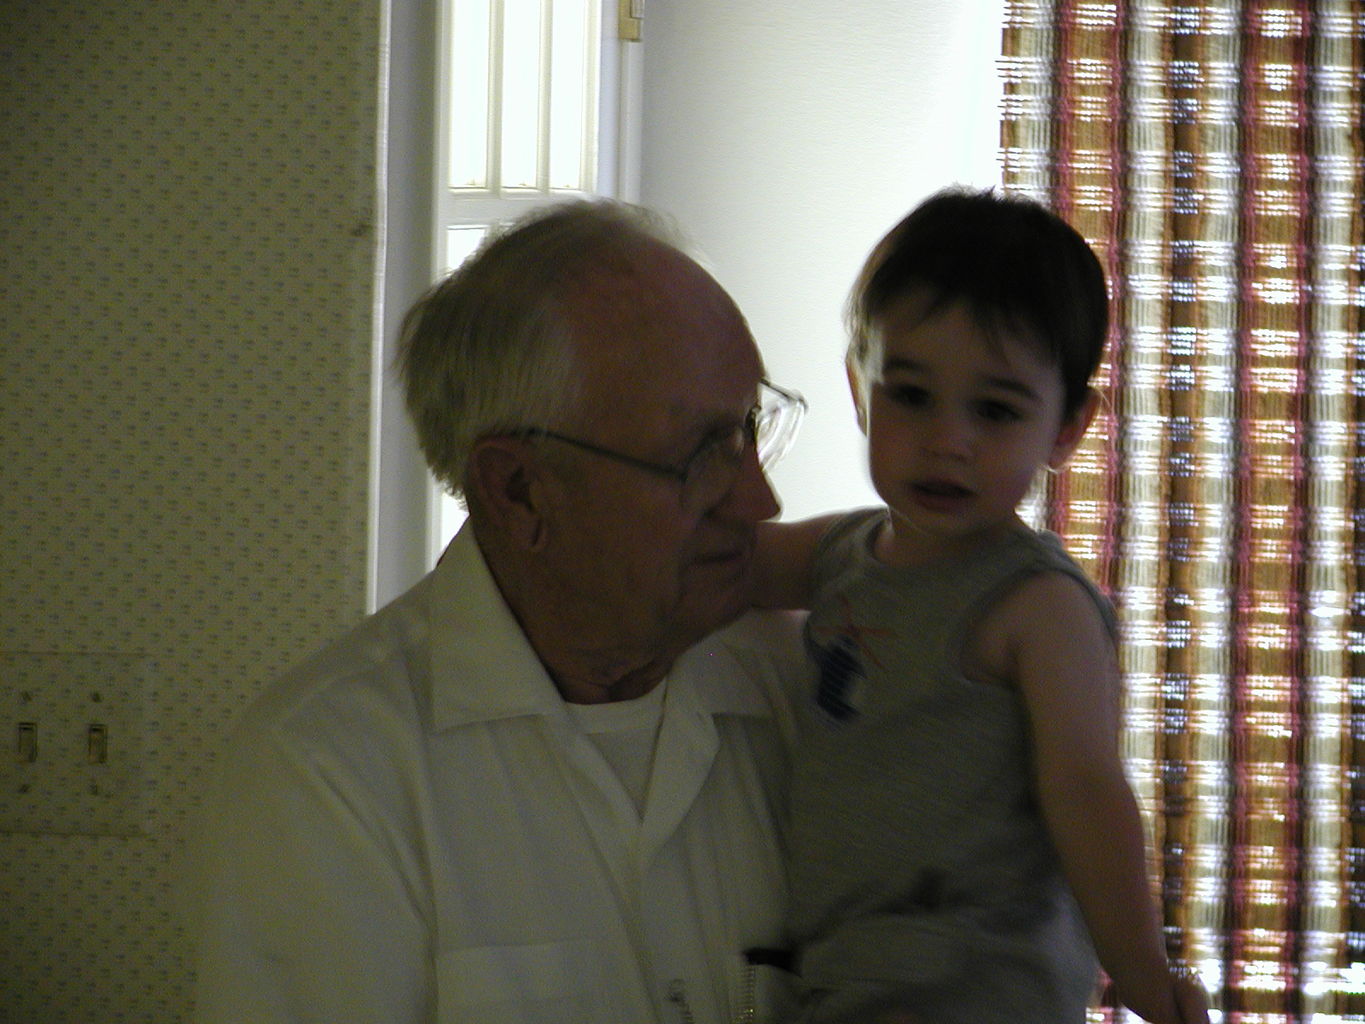 Visit with PopPop - Friday
